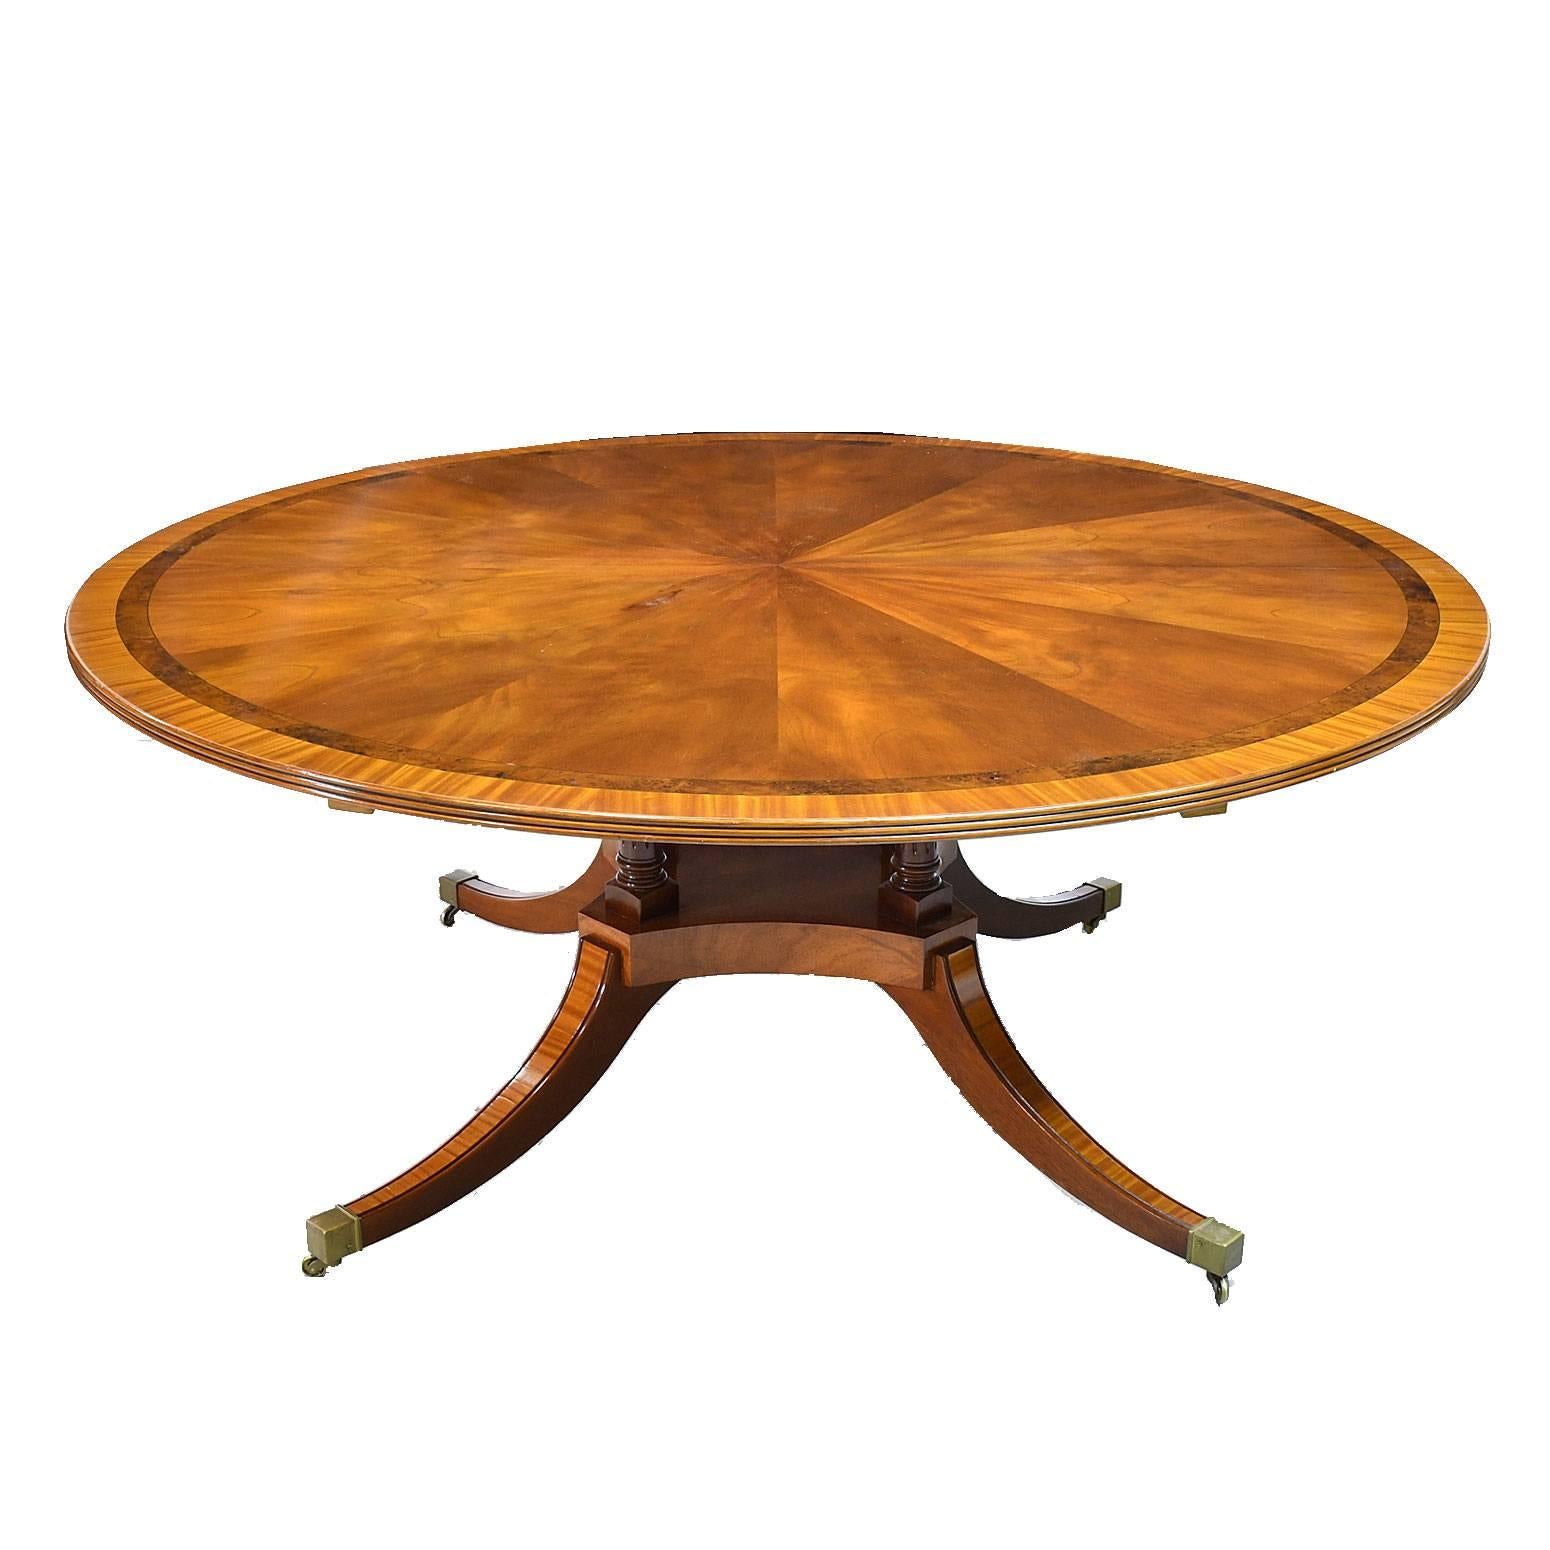 A very beautiful handmade 72" dining table in the style of the English Regency with a large round top in mahogany with crotch mahogany pie-shaped cross-band with satinwood bandings, reeded edge, yew wood and ebony line edges, resting on